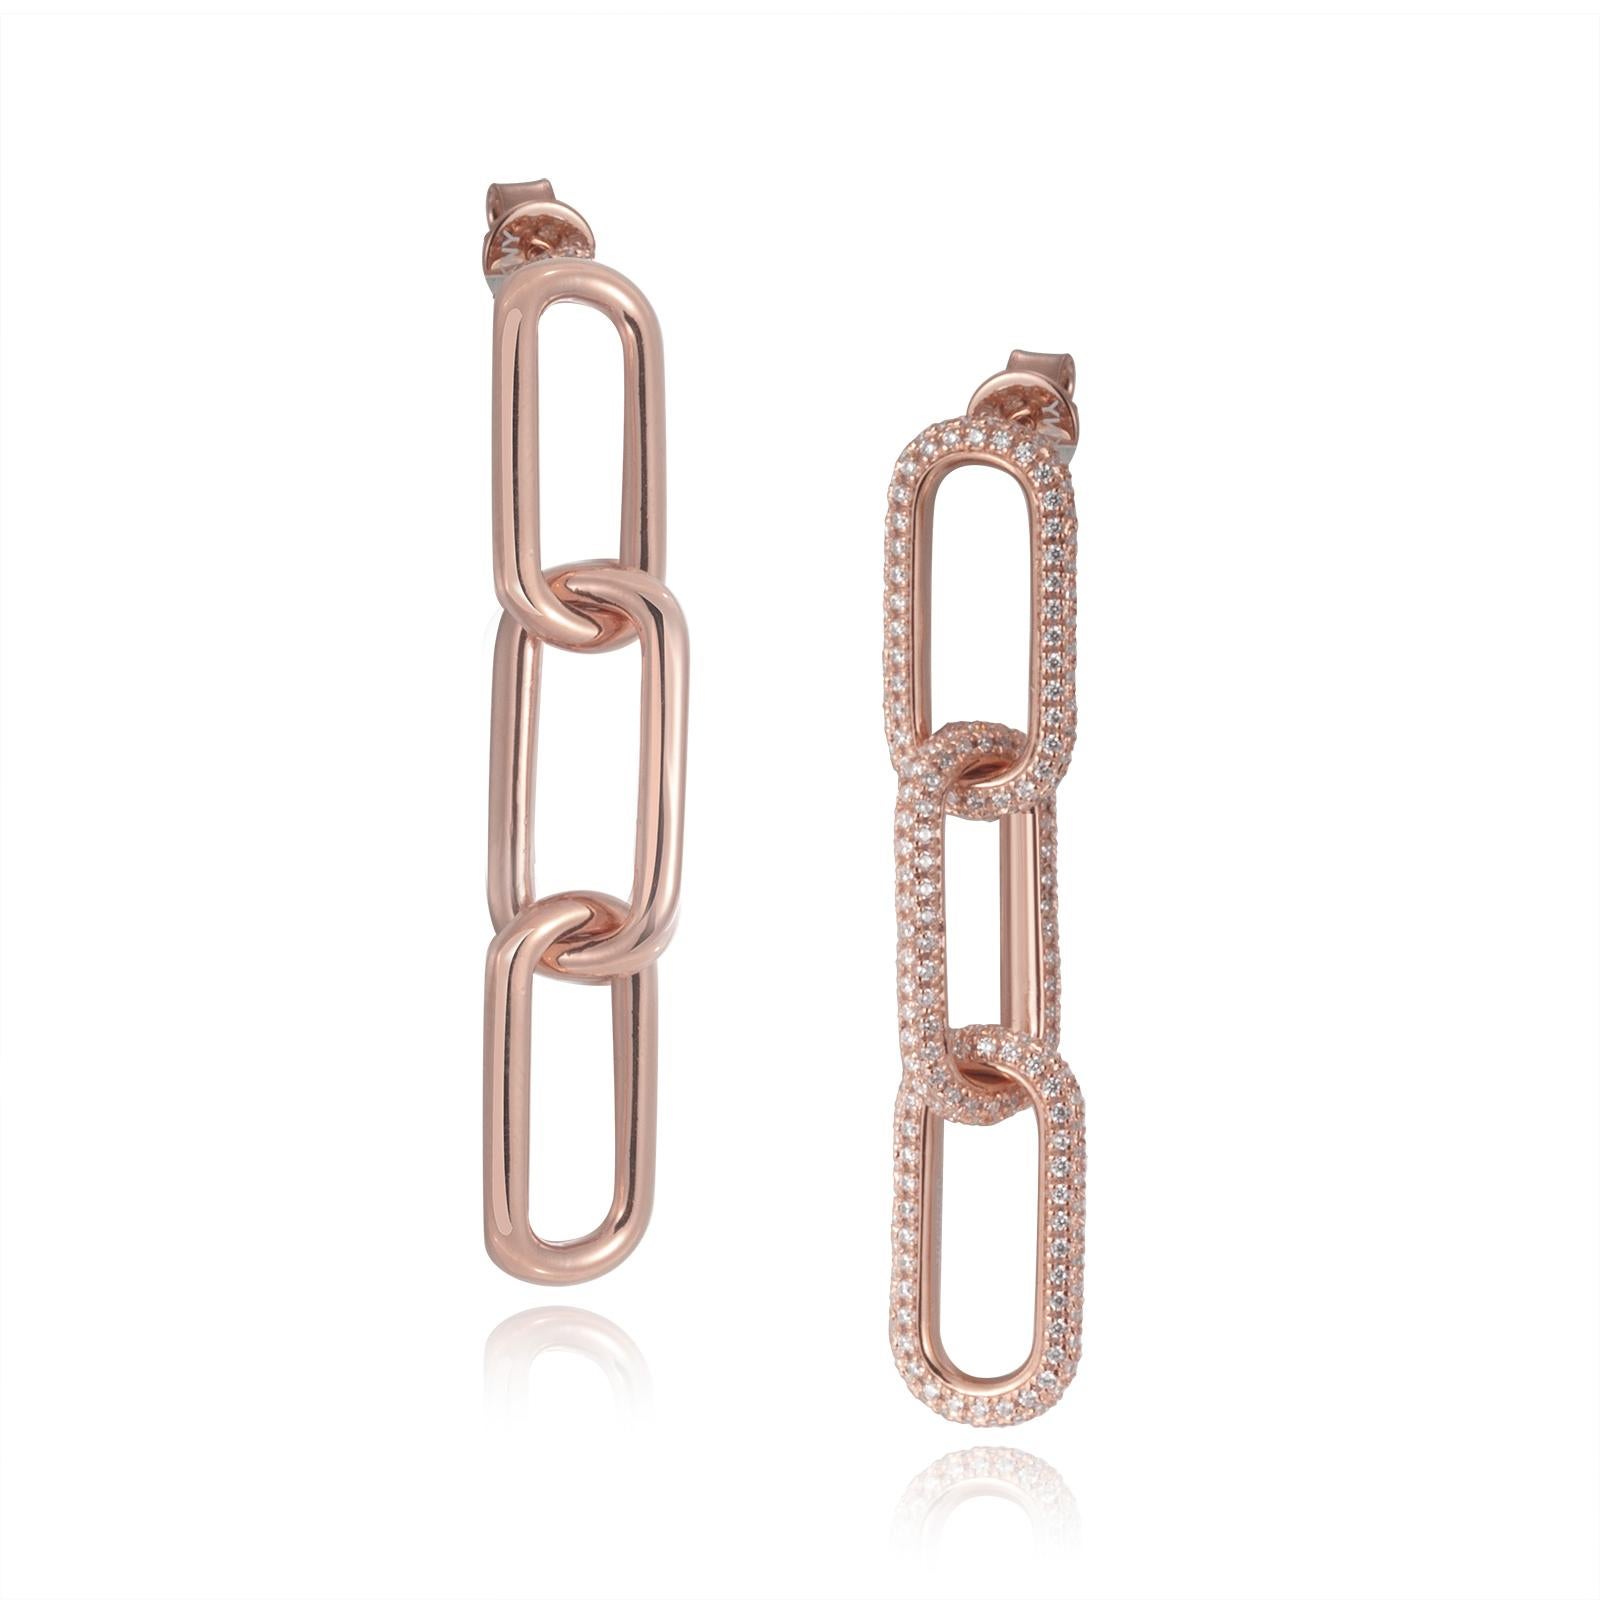 These mixed paperclip earrings are the perfect contemporary accessory; giving you that standout look.  .925 sterling silver base with 24k yellow gold vermeil. Also available in sterling silver or 24k rose gold vermeil.   

· 15 mm oval paperclip